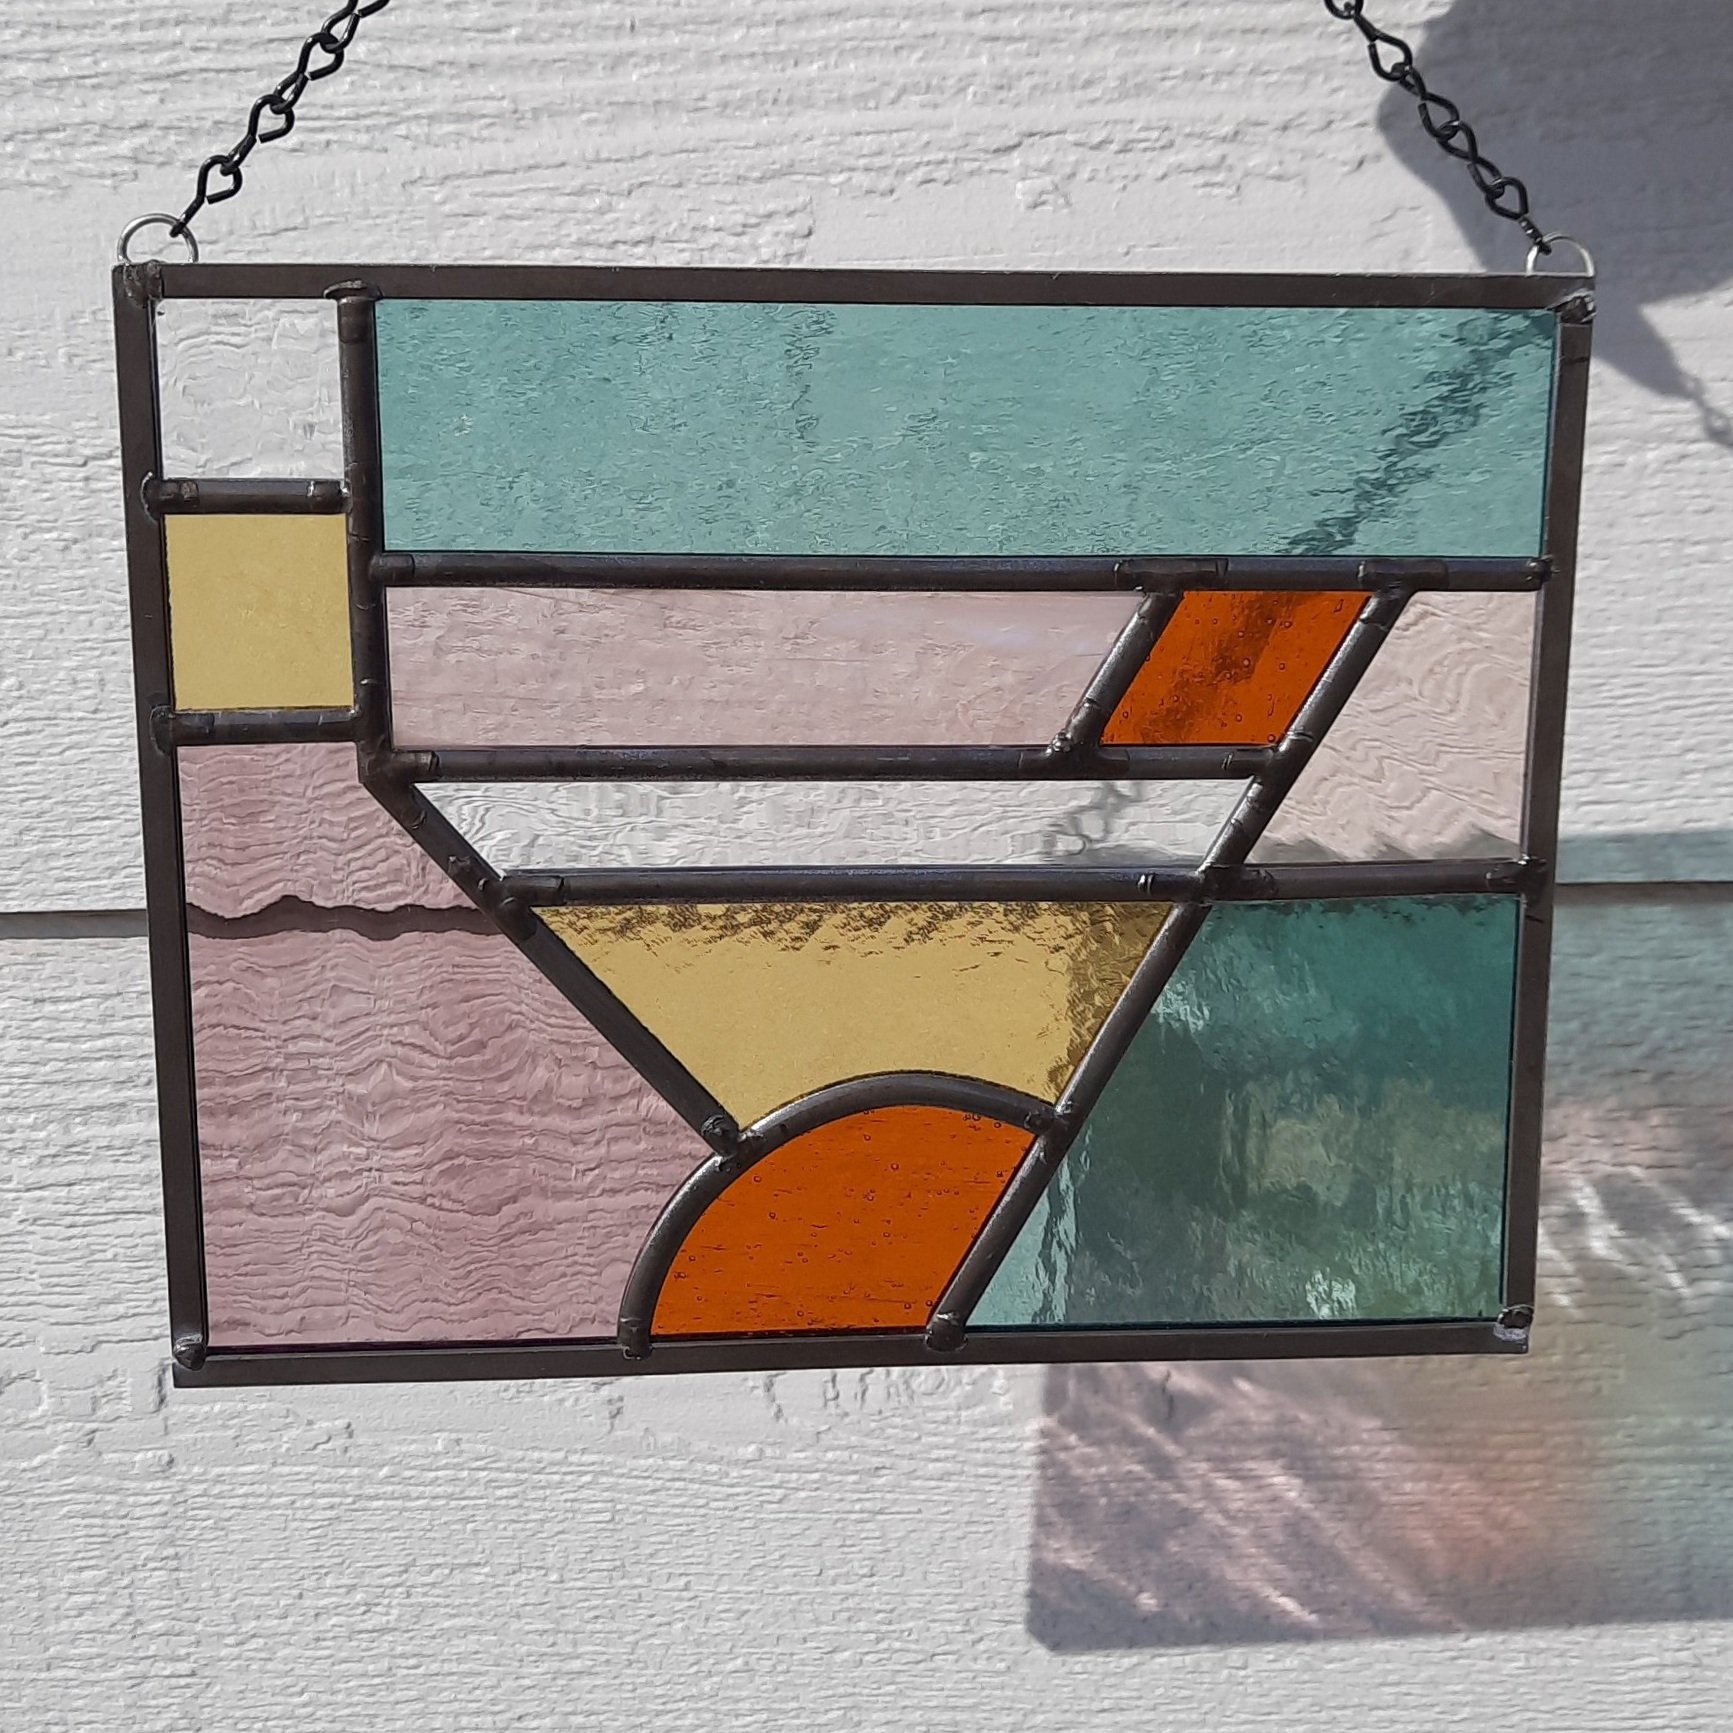 Rayer's Bearden Stained Glass Supply & Gallery Inc.